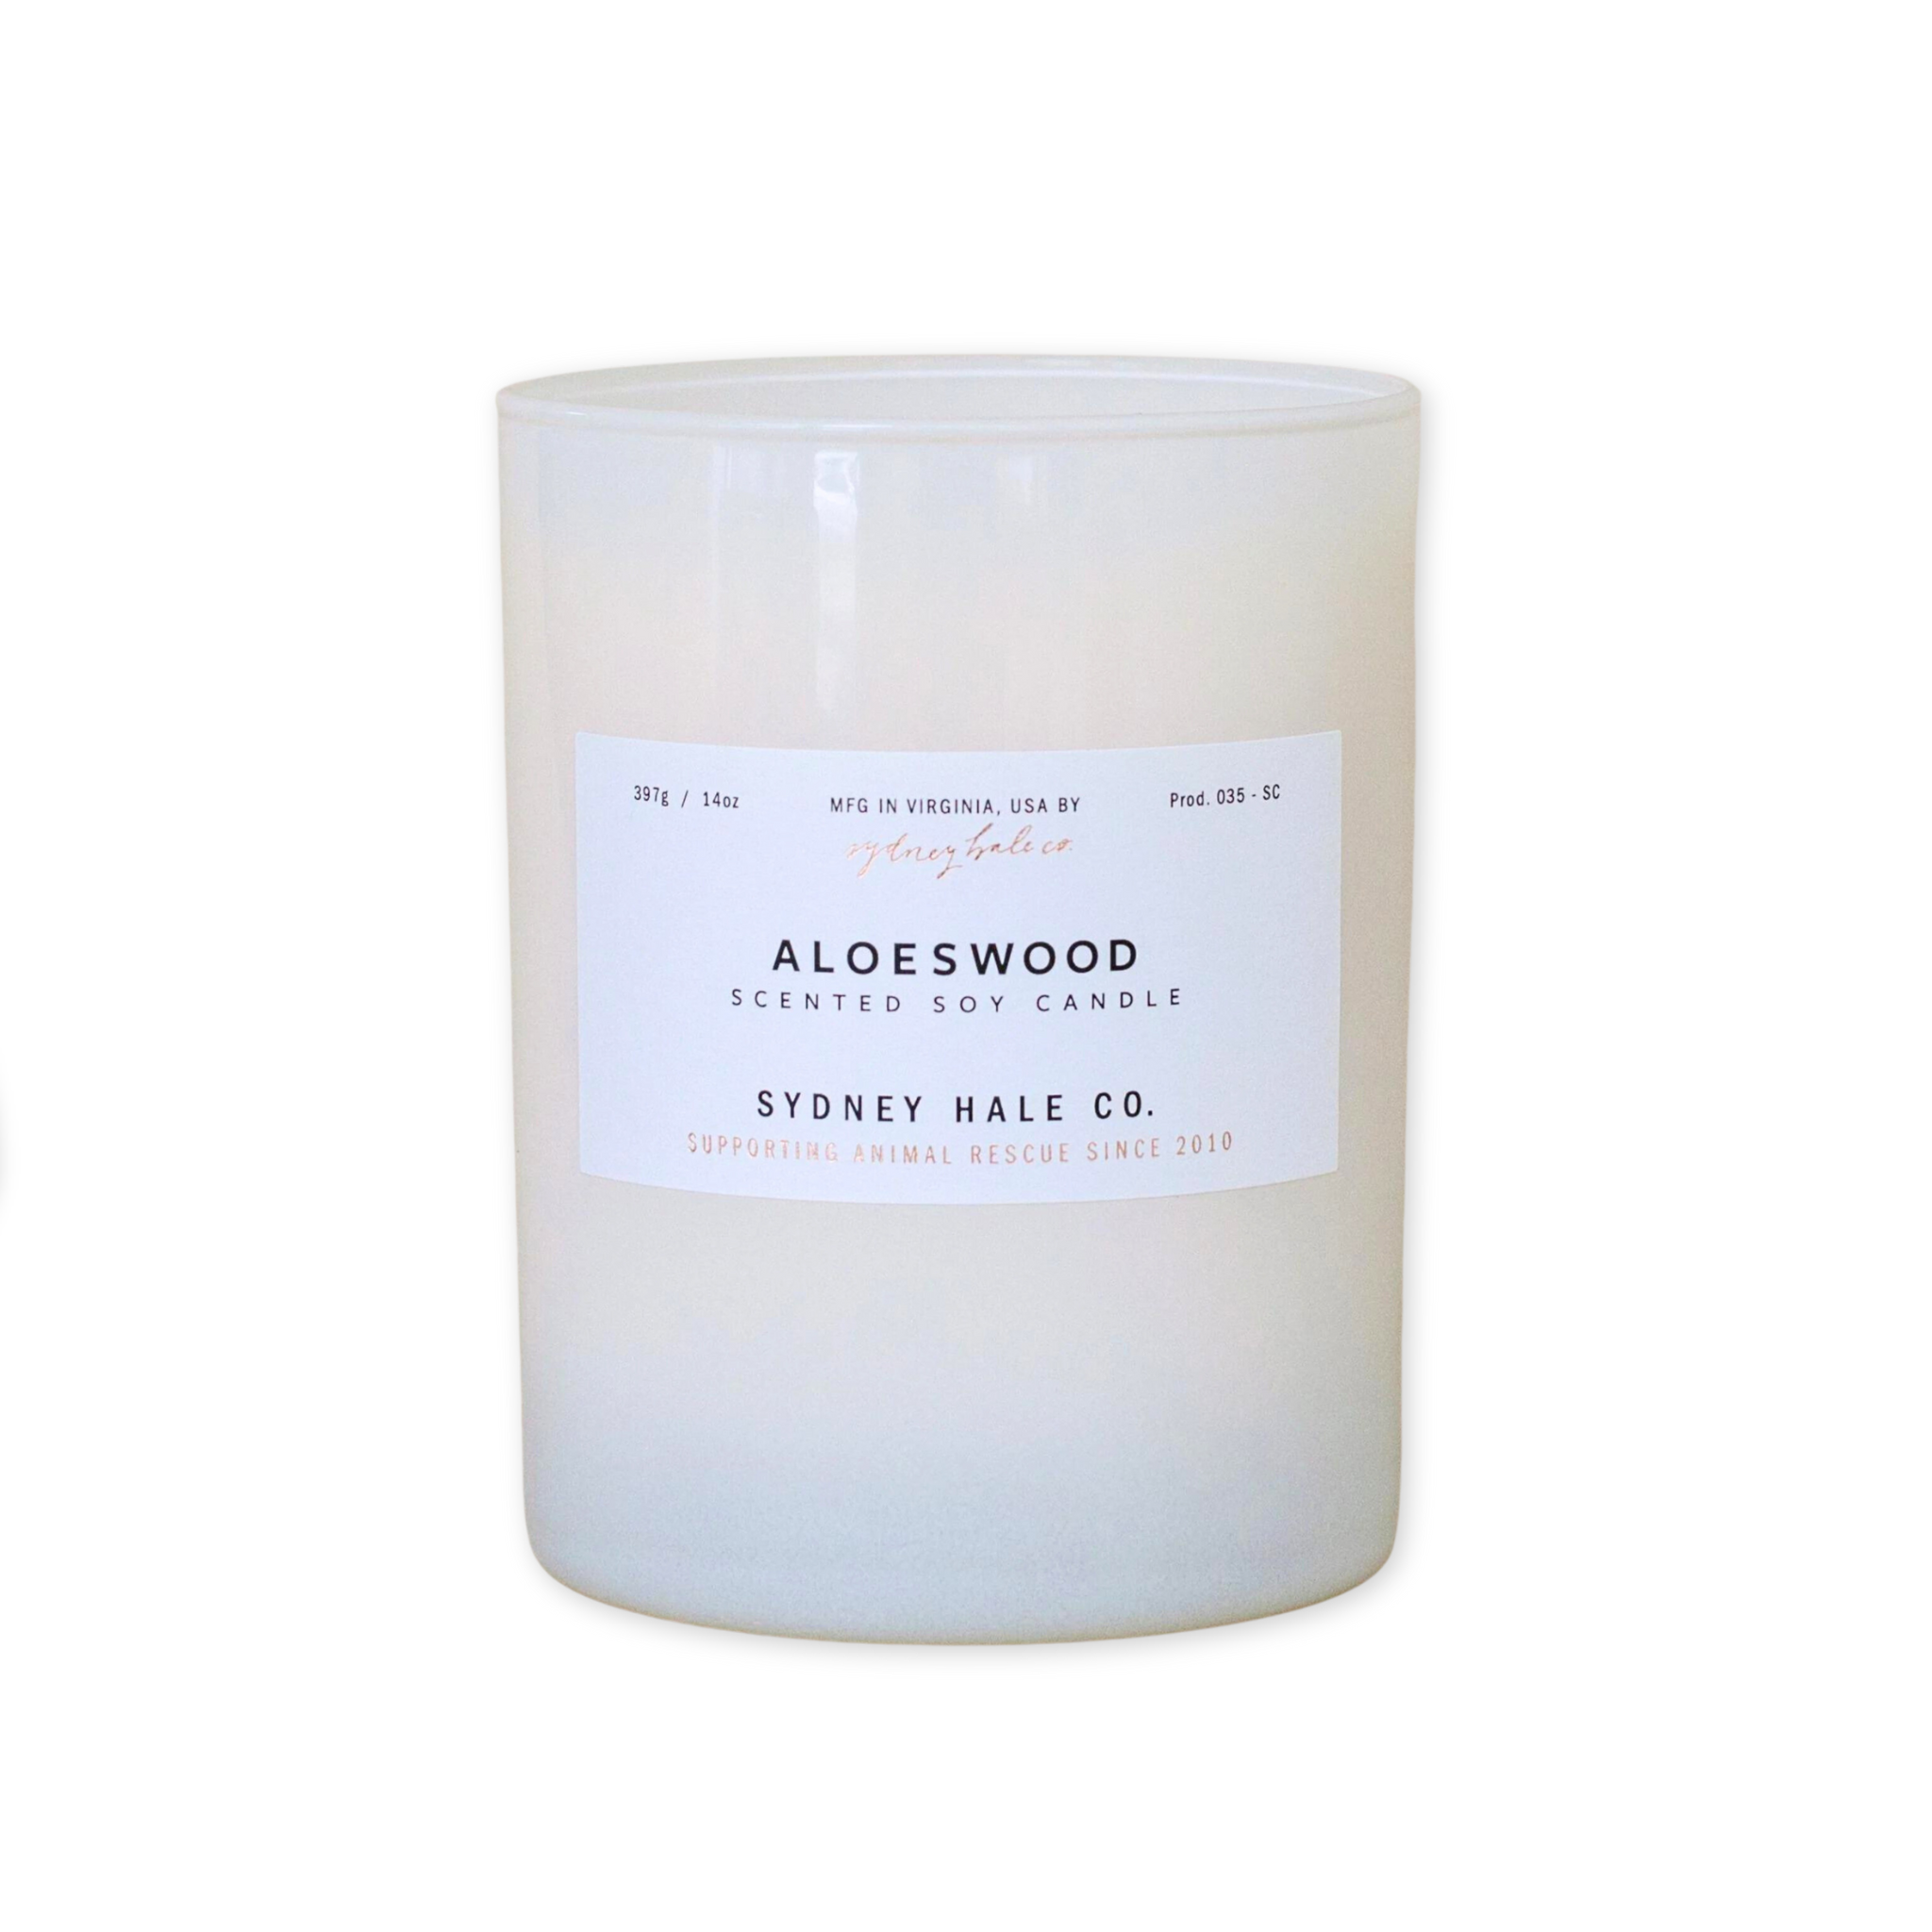 aloeswood scented candle